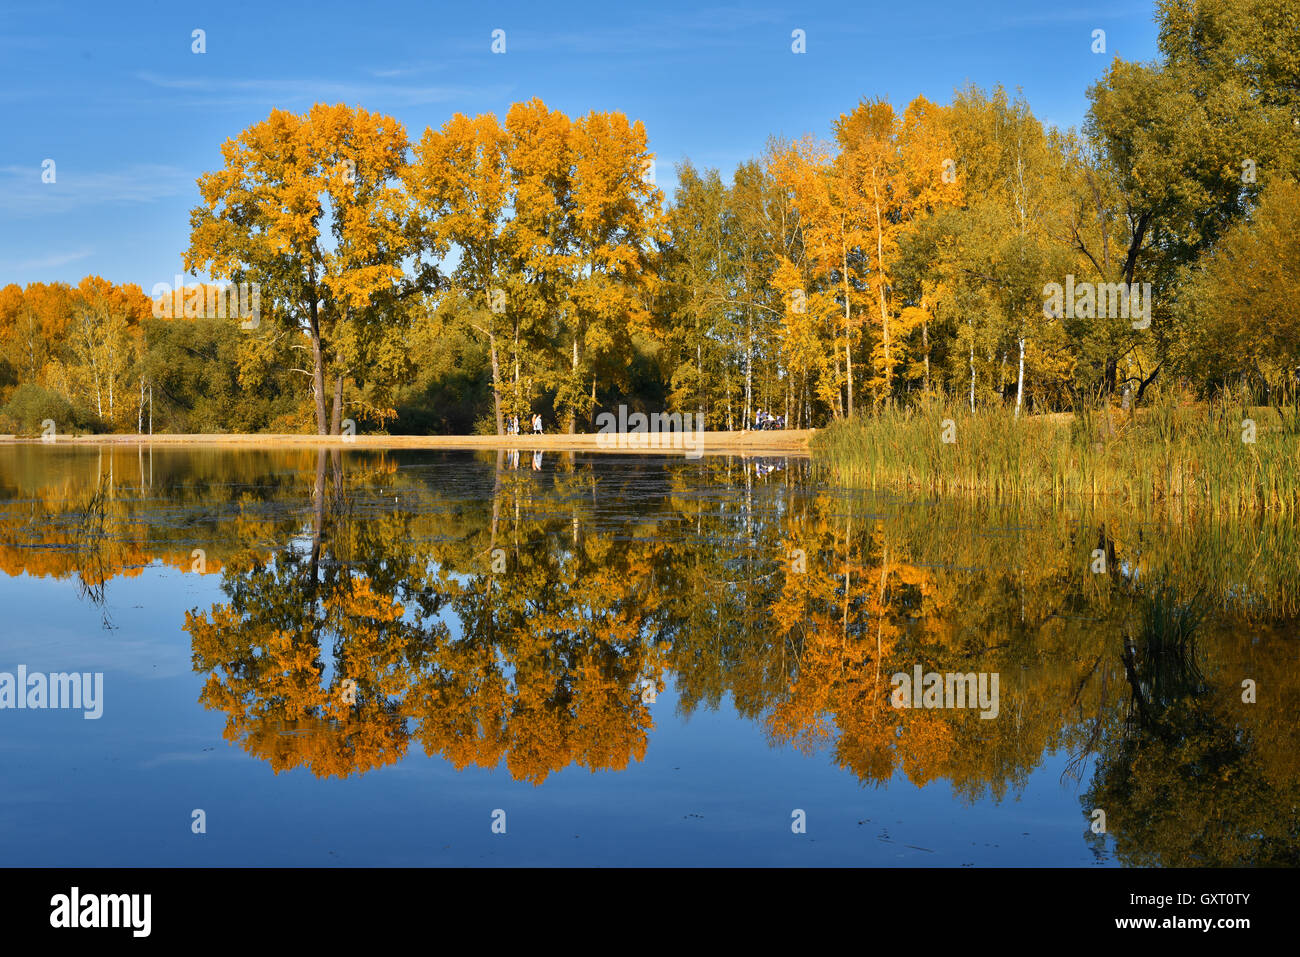 Poplar trees with yellow leaves reflected in the waters of the lake in autumn day Stock Photo